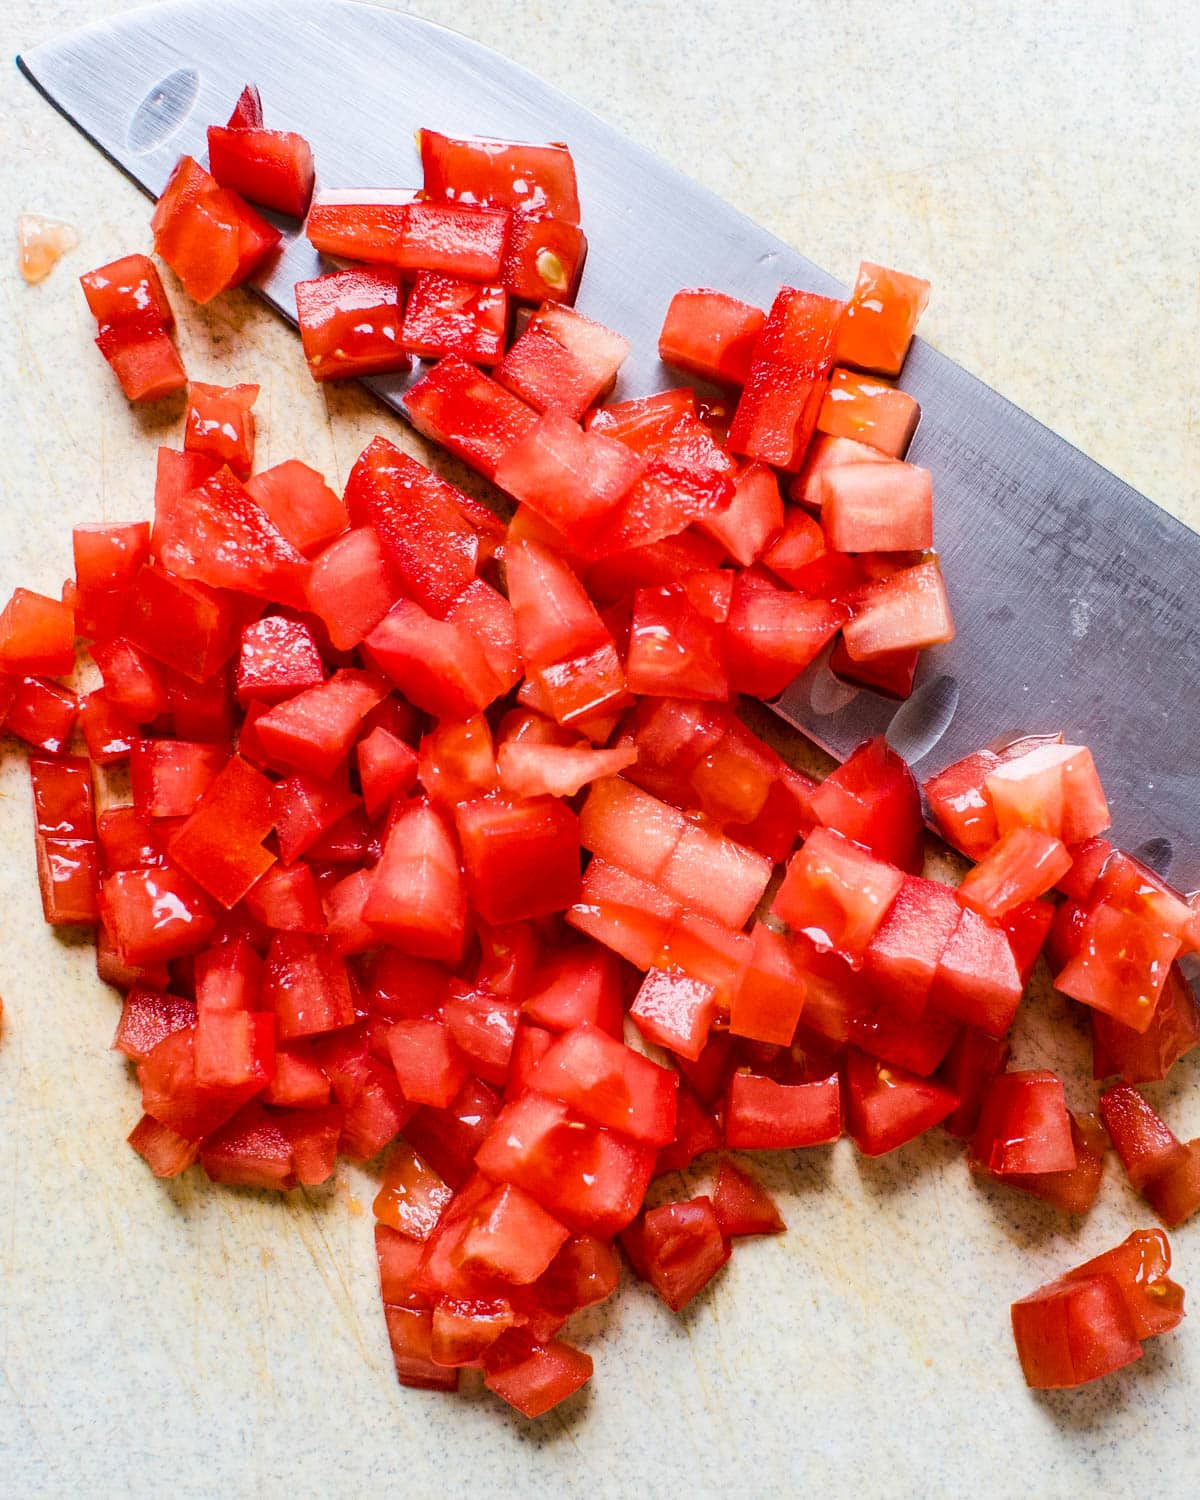 Dicing tomatoes on a cutting board.